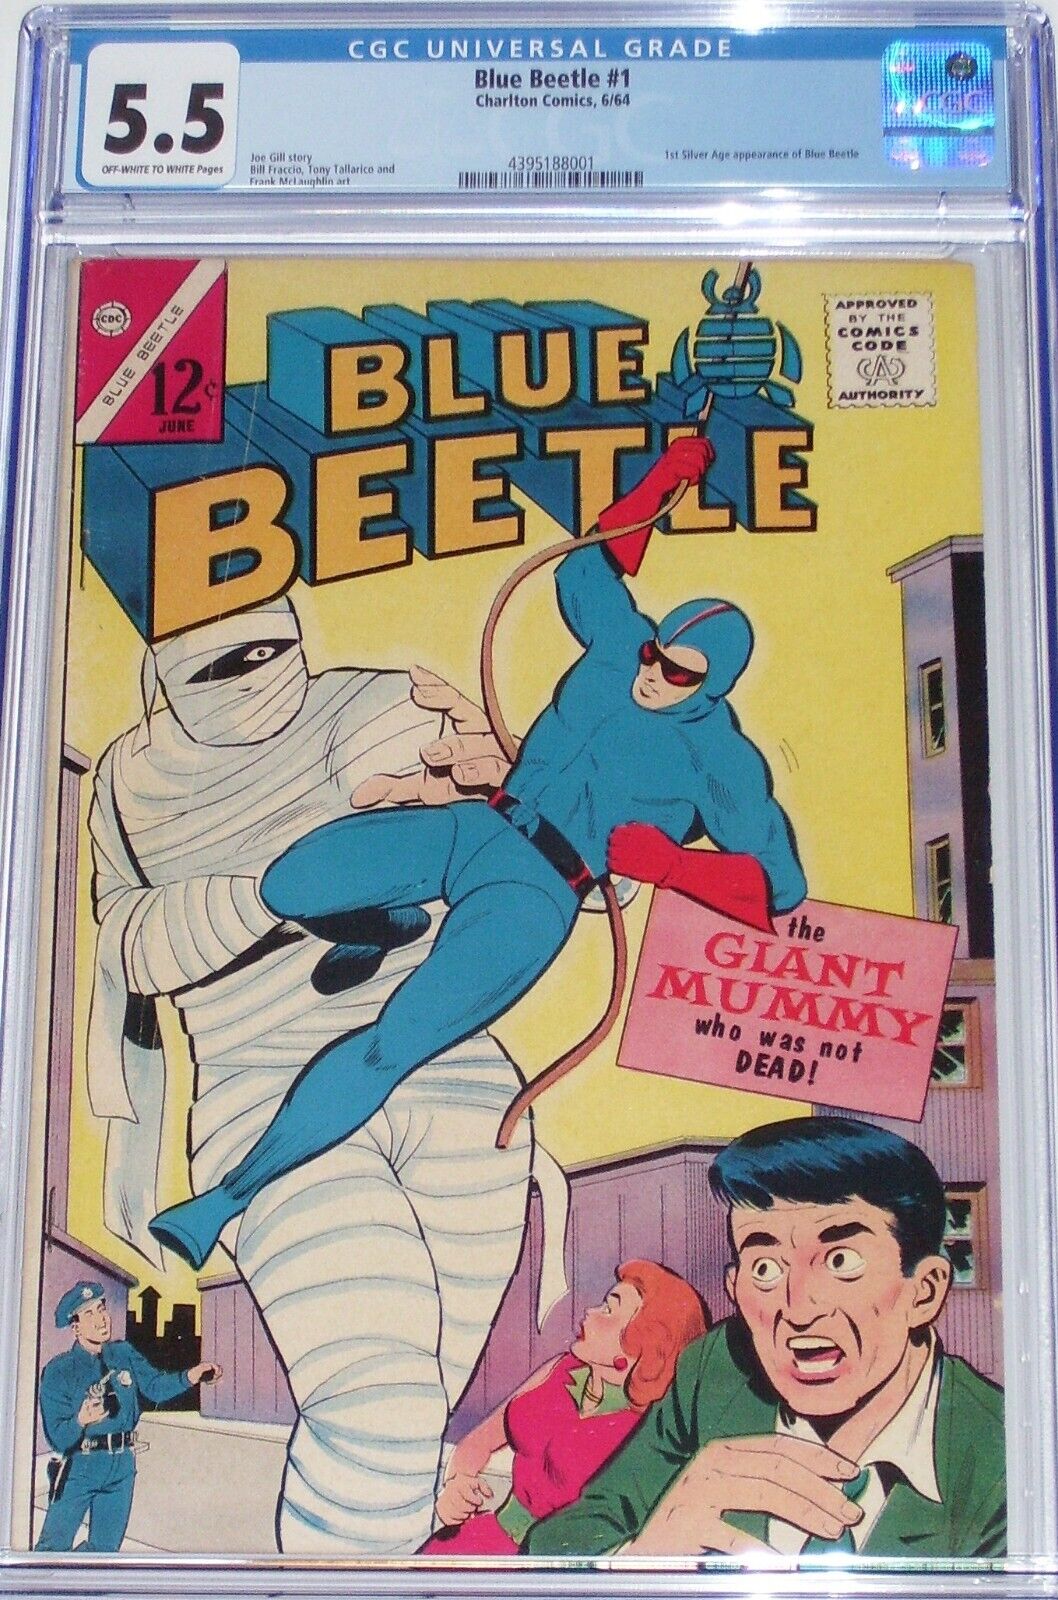 Blue Beetle #1 CGC 5.5 June 1964 1st Silver Age appearance of the Blue Beetle